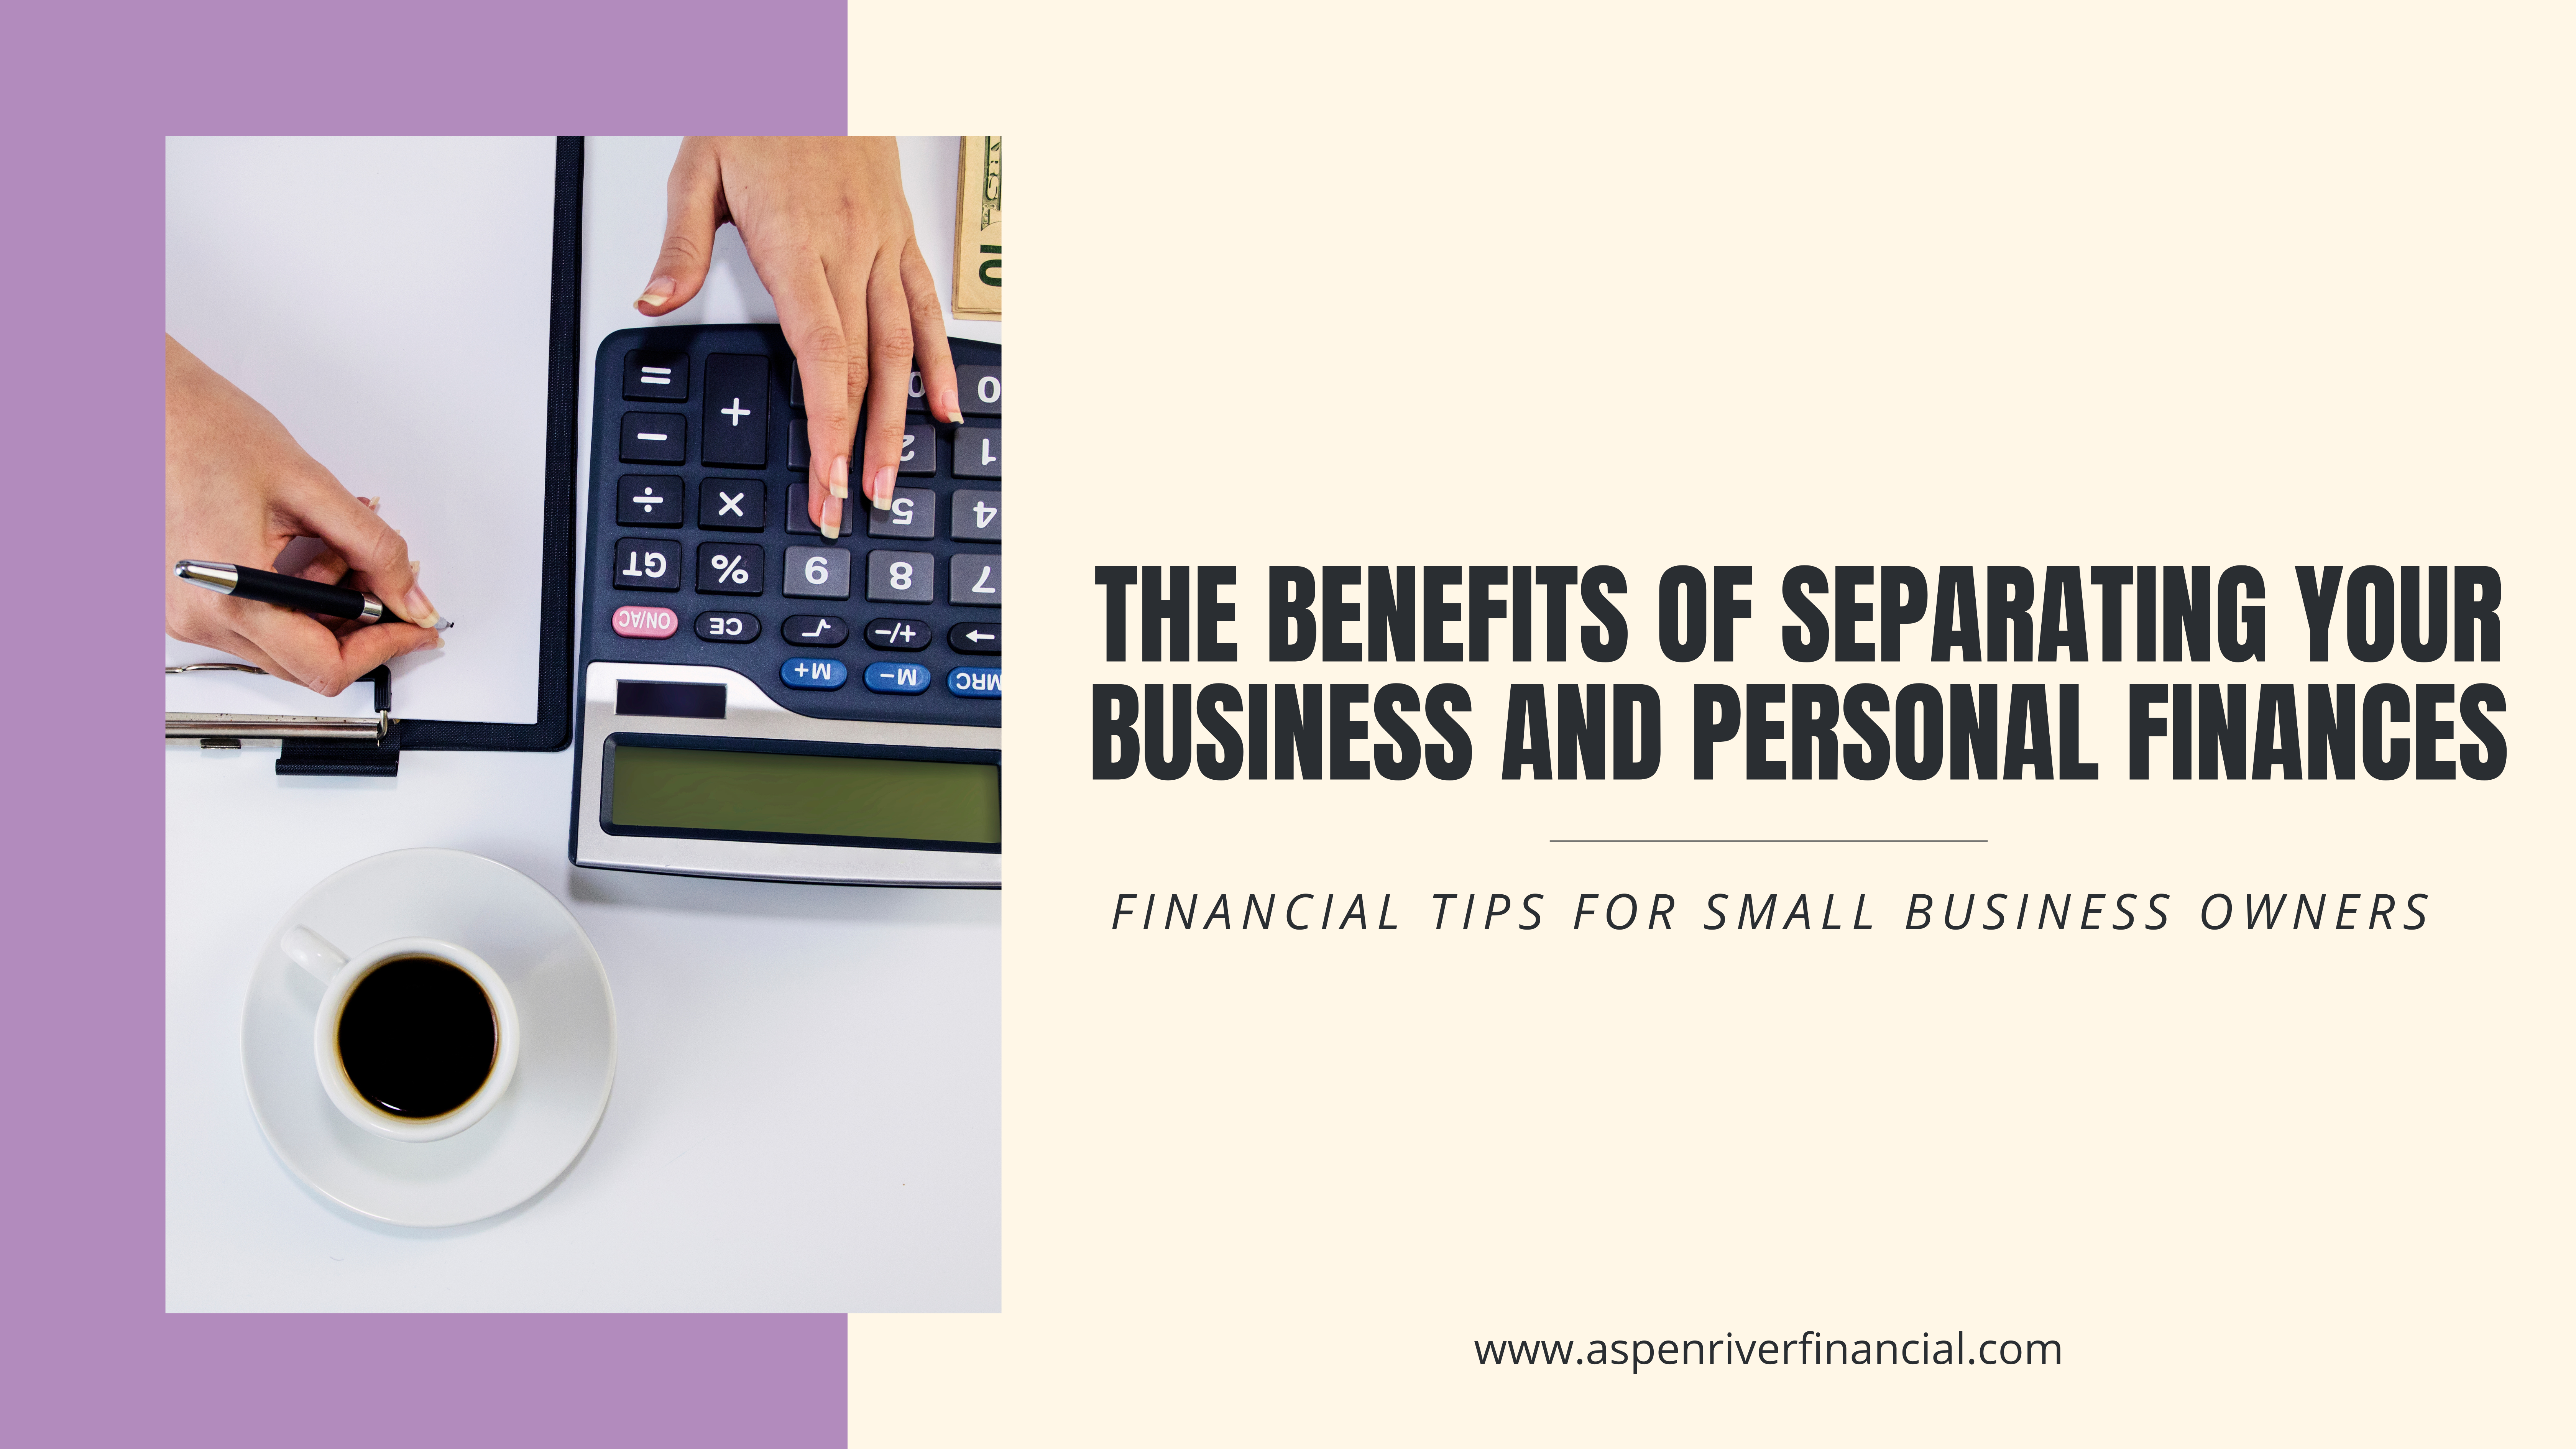 The benefits of separating your business finances from your personal finances